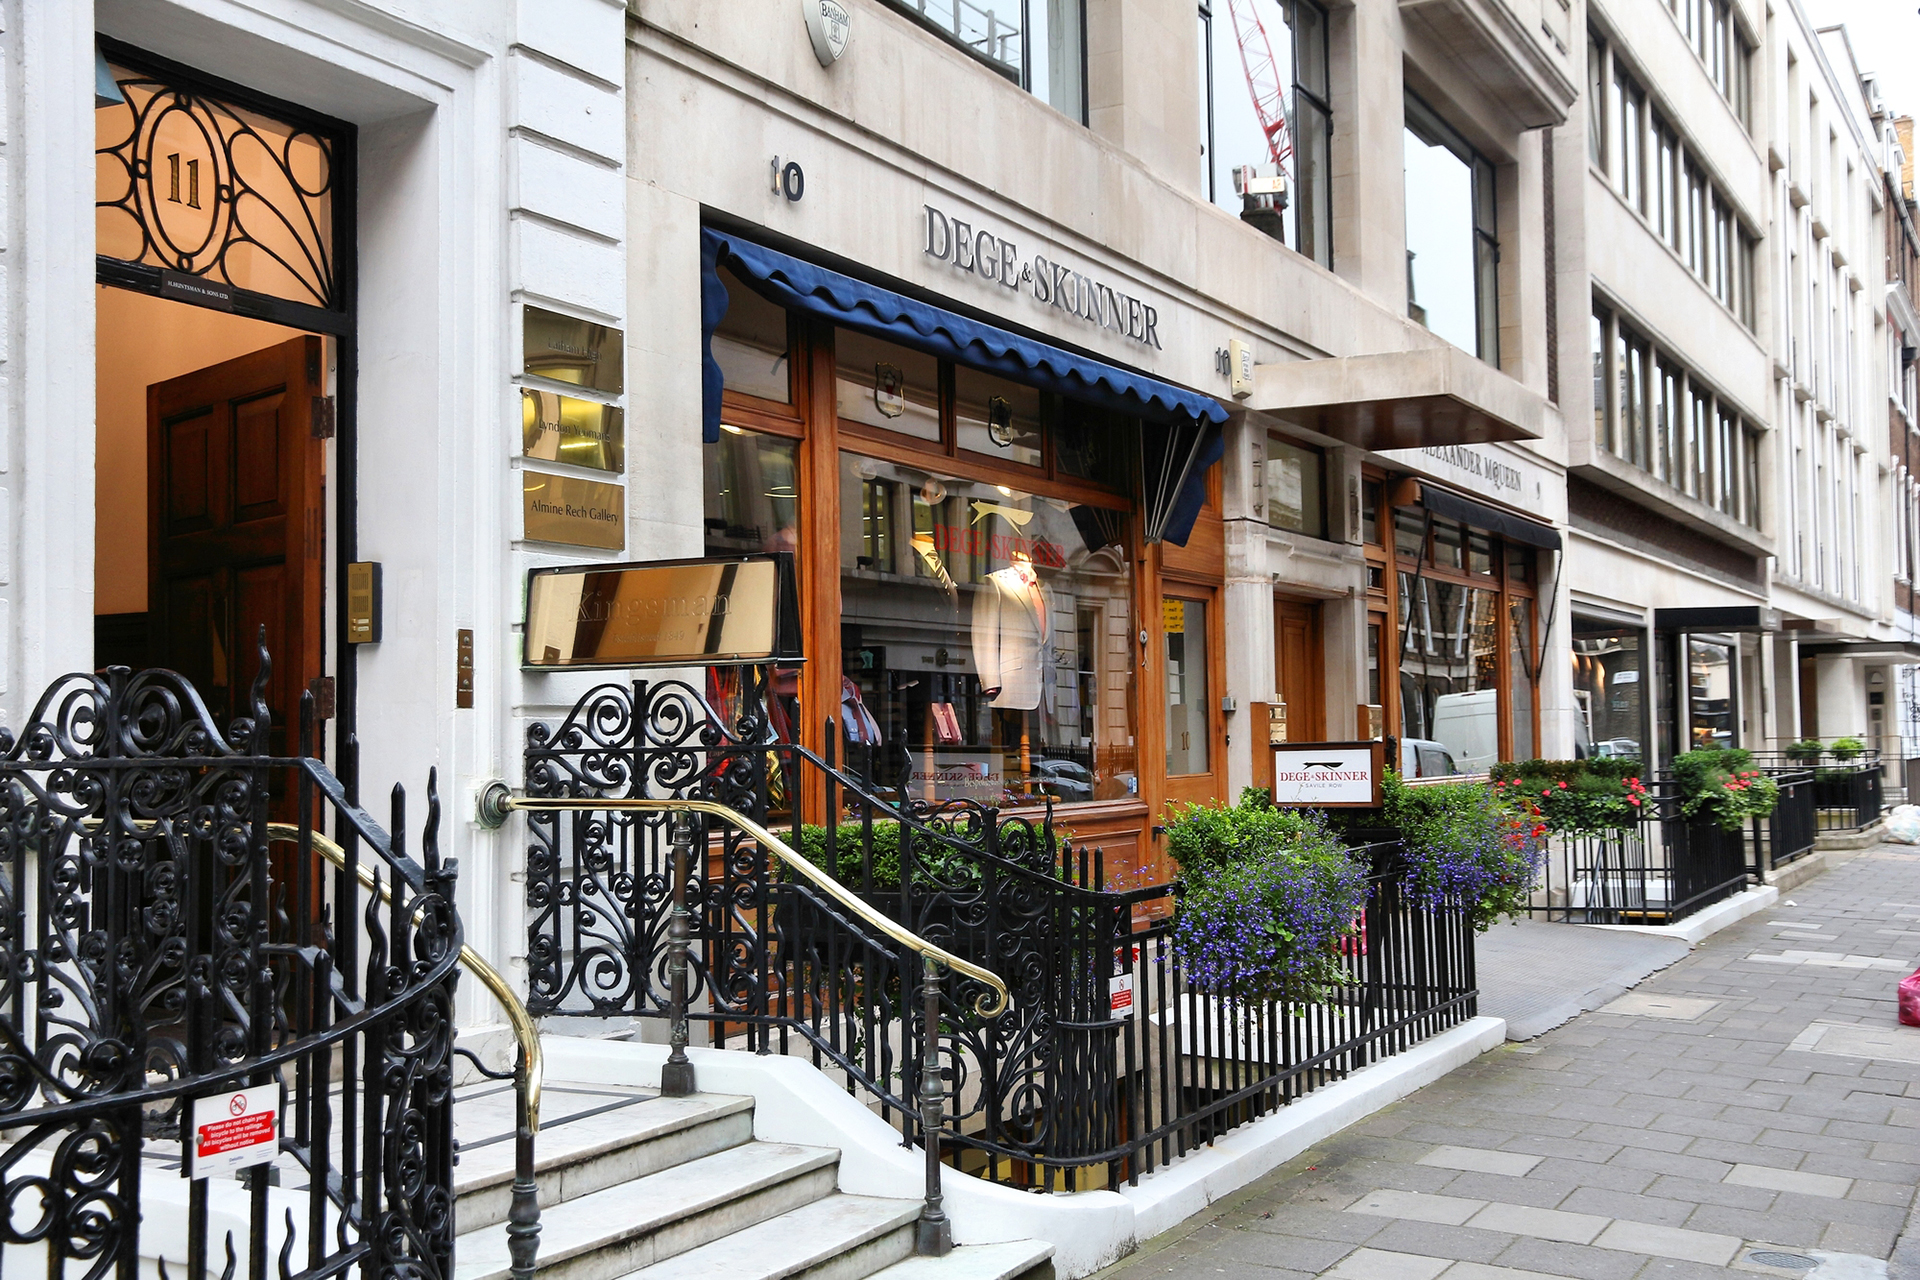 Visiting the Savile Row street in London for menswear